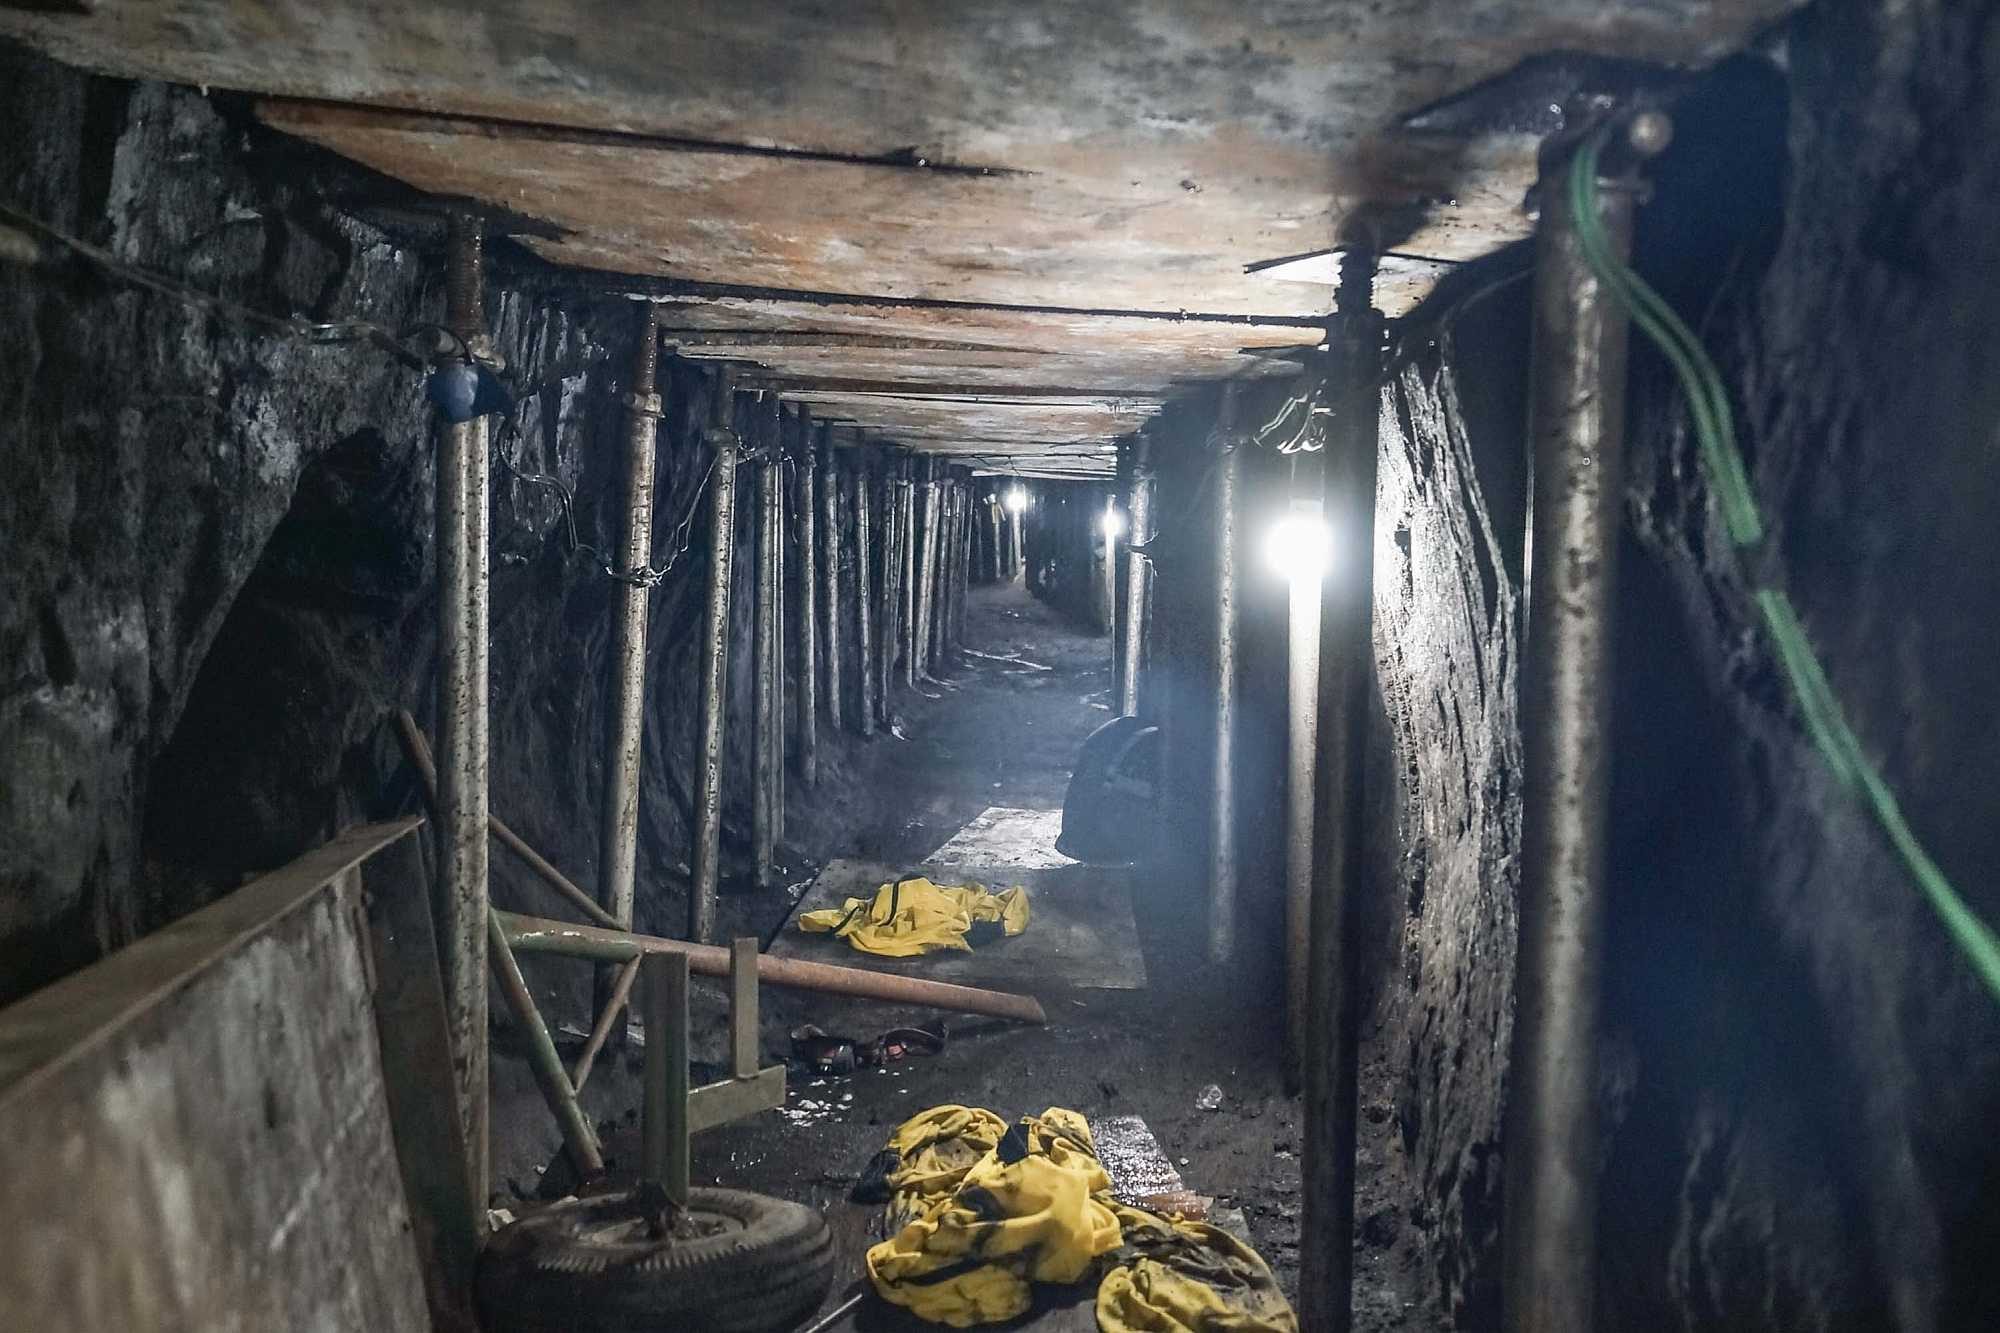 A gang of 16 dug a sophisticated 600-meter tunnel equipped with lights.